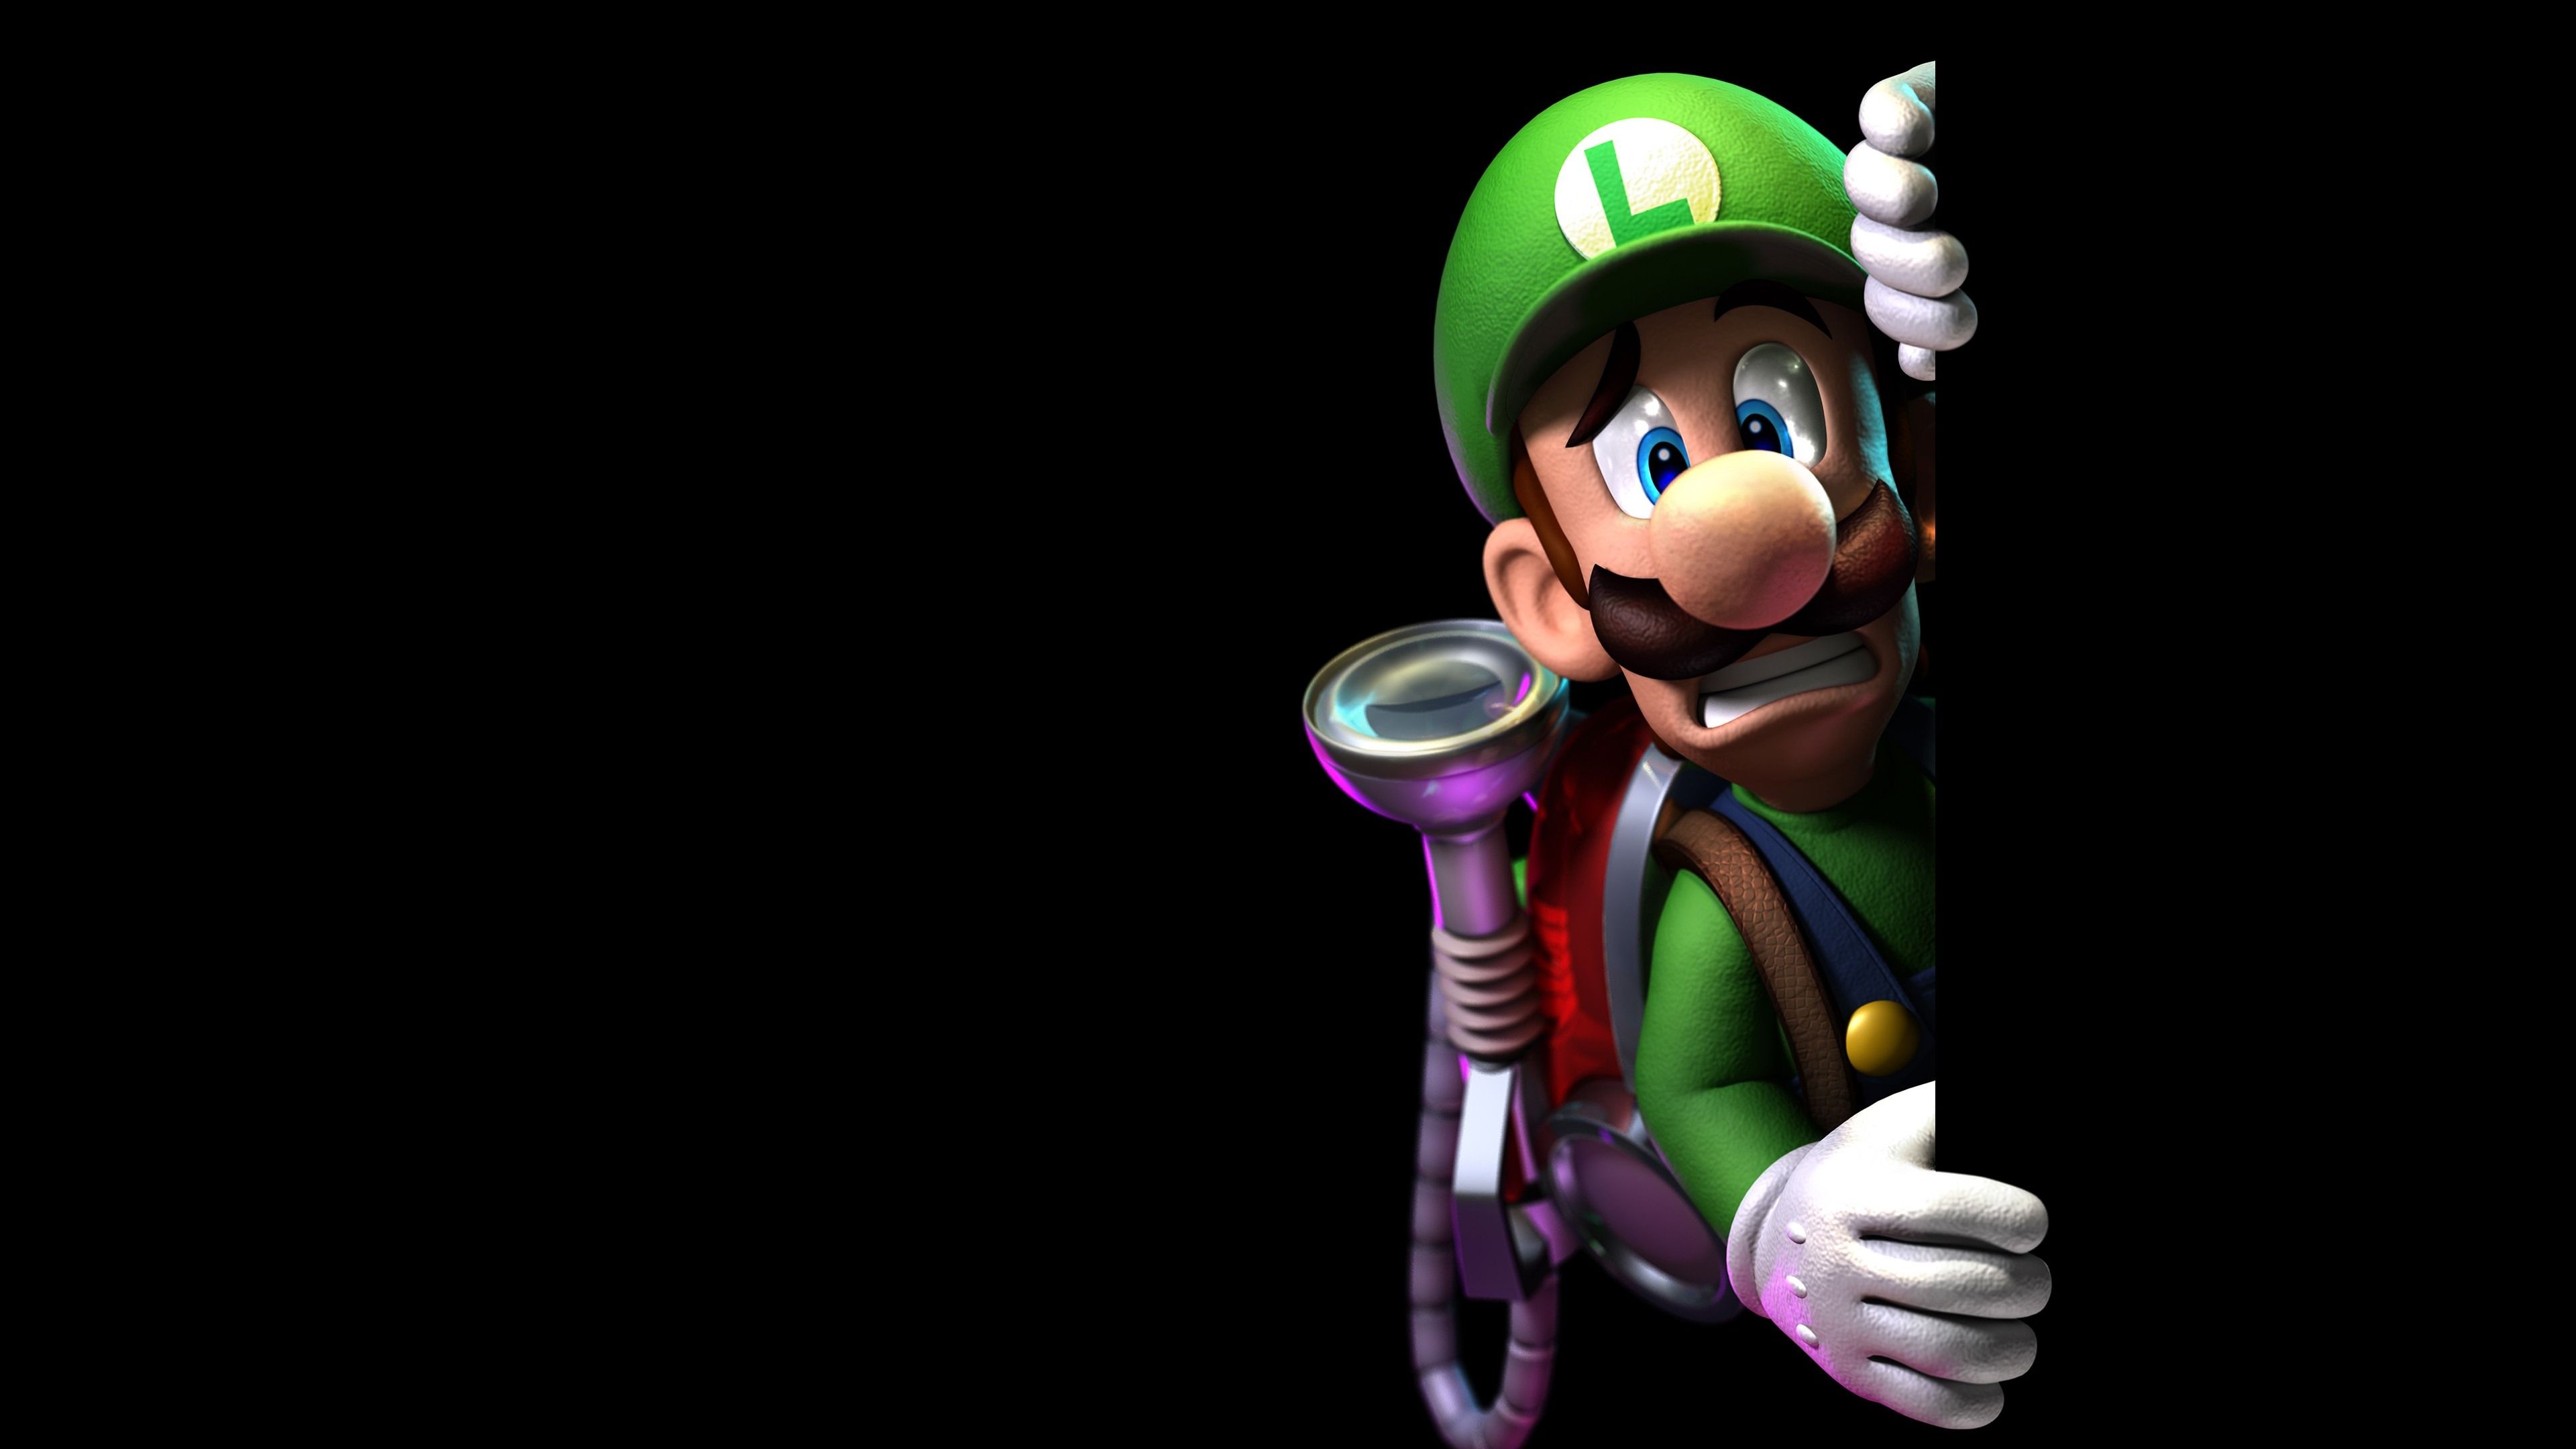 Wallpaper Mario, video game, black background 3840x2160 UHD 4K Picture, Image